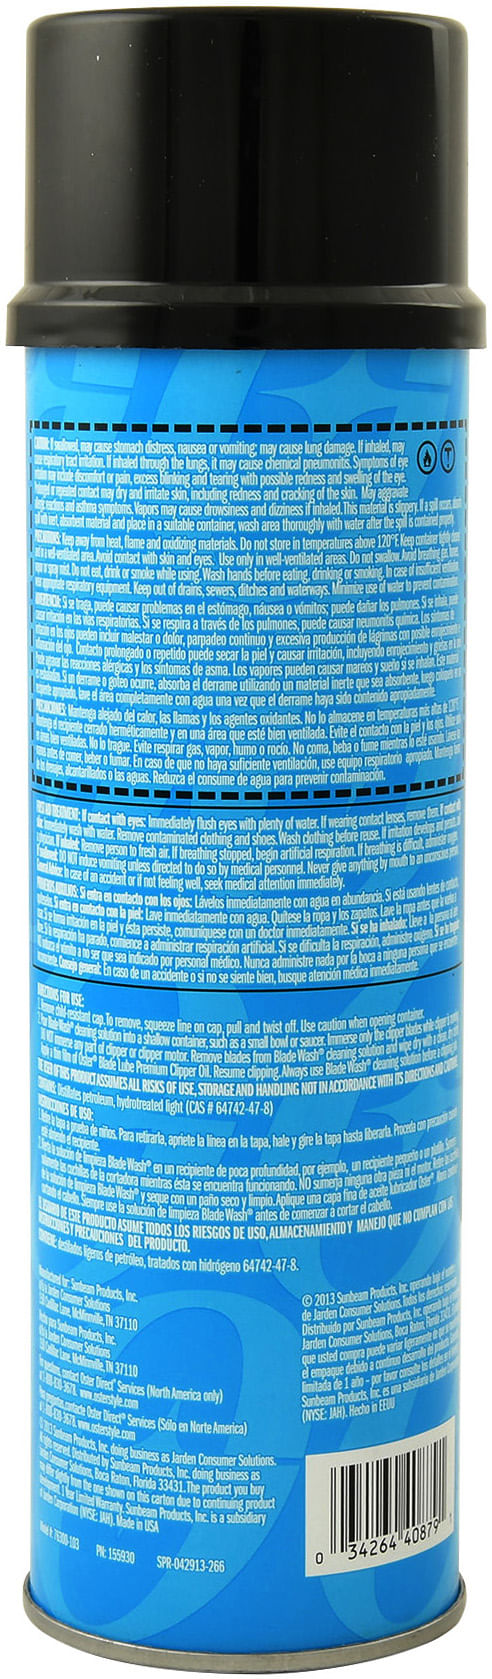 Oster Blade Wash Cleaning Solution, 18 oz - Jeffers